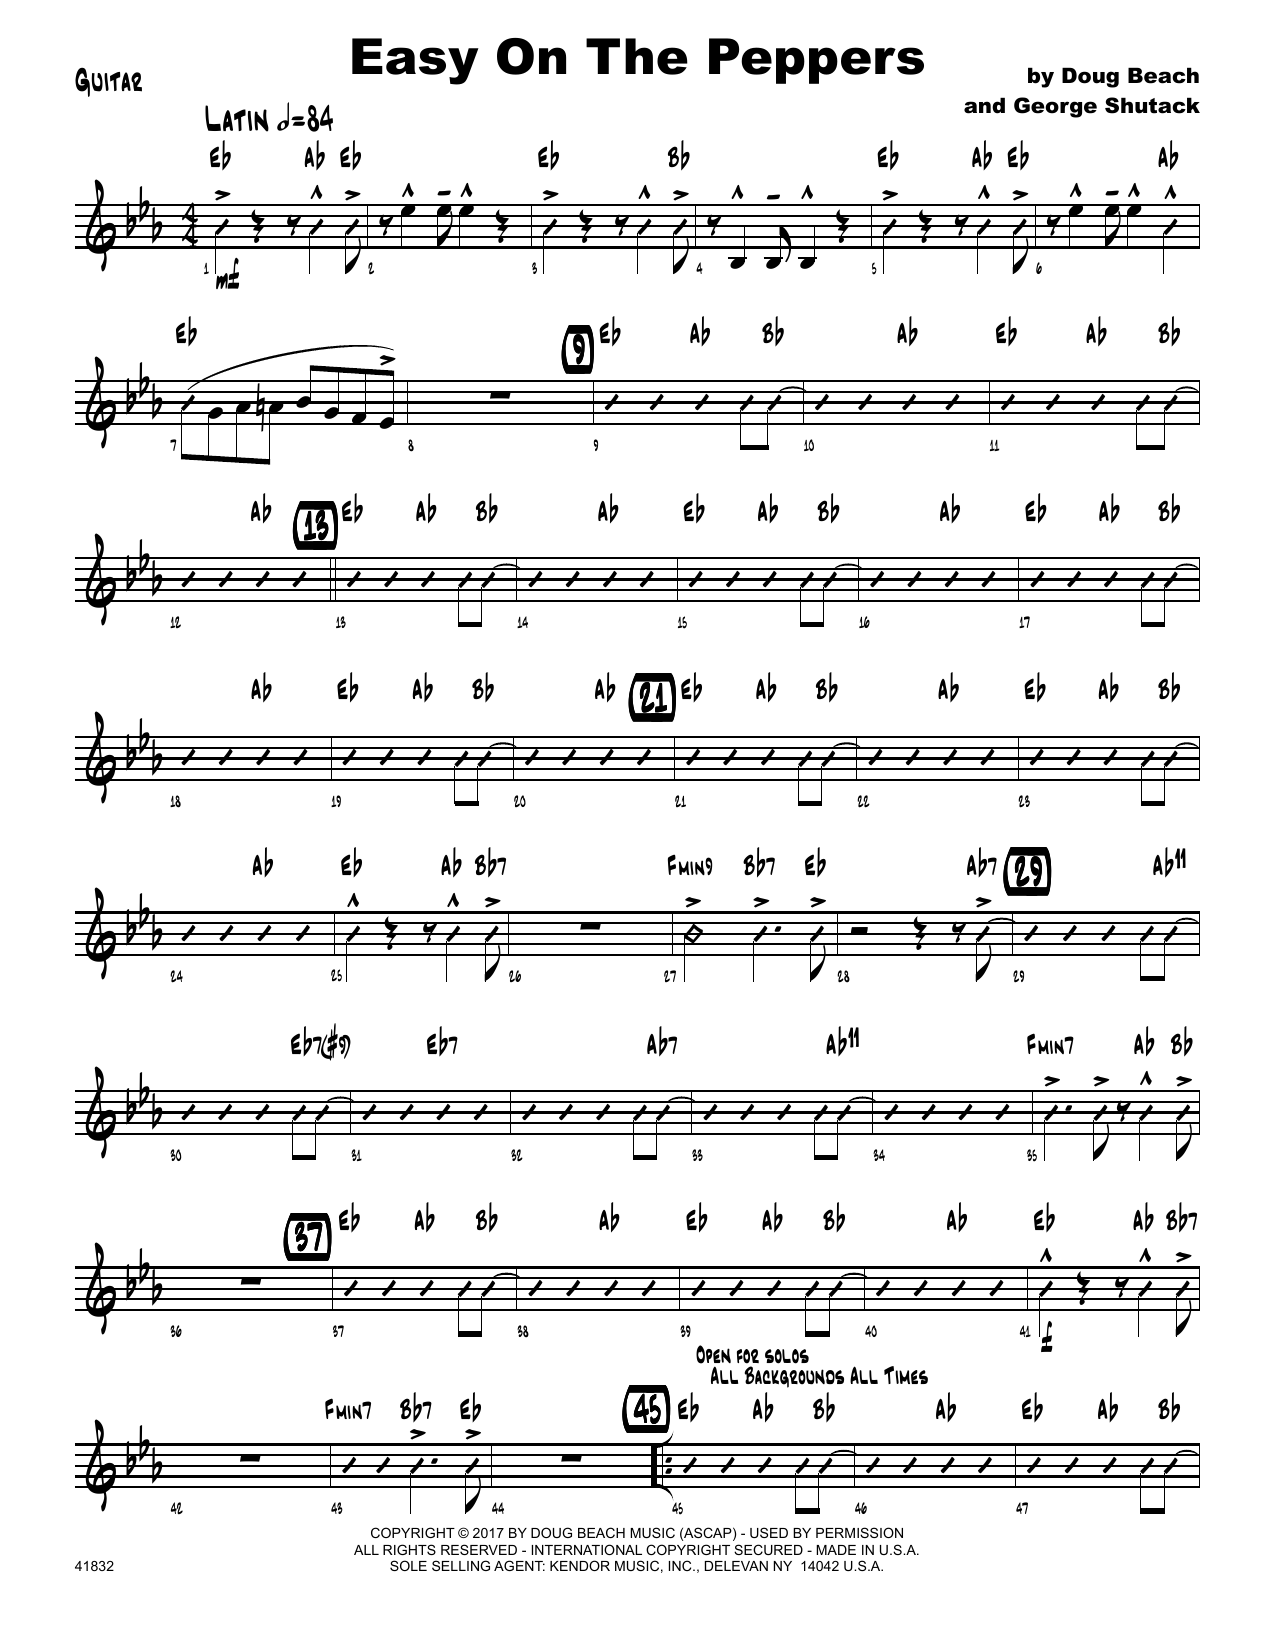 Download Doug Beach & George Shutack Easy On The Peppers - Guitar Sheet Music